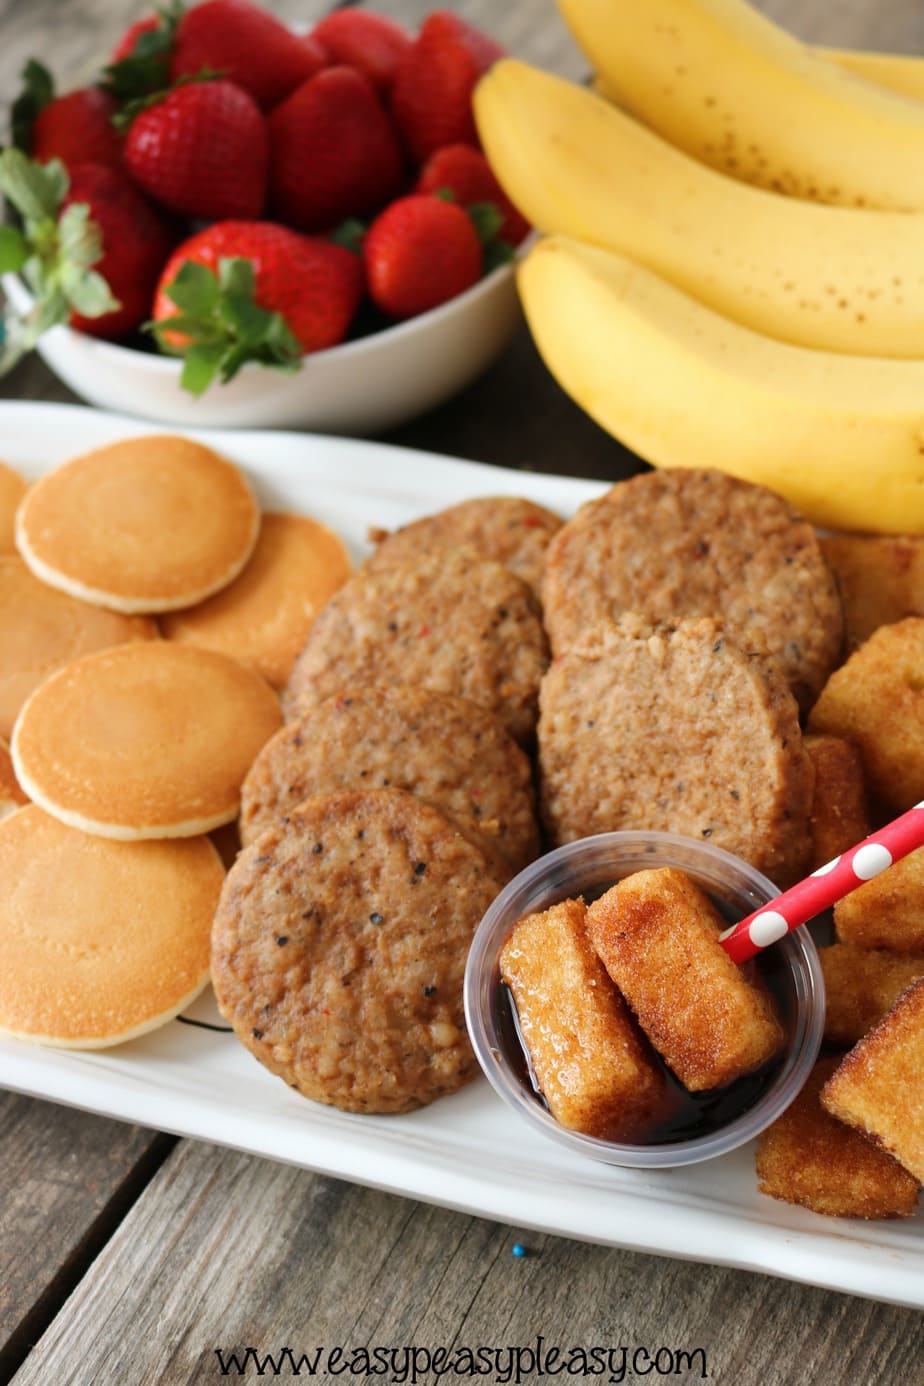 Create an Easy Weekday Breakfast Idea That Your Kids Will Love with these easy tips from easypeasypleasy.com